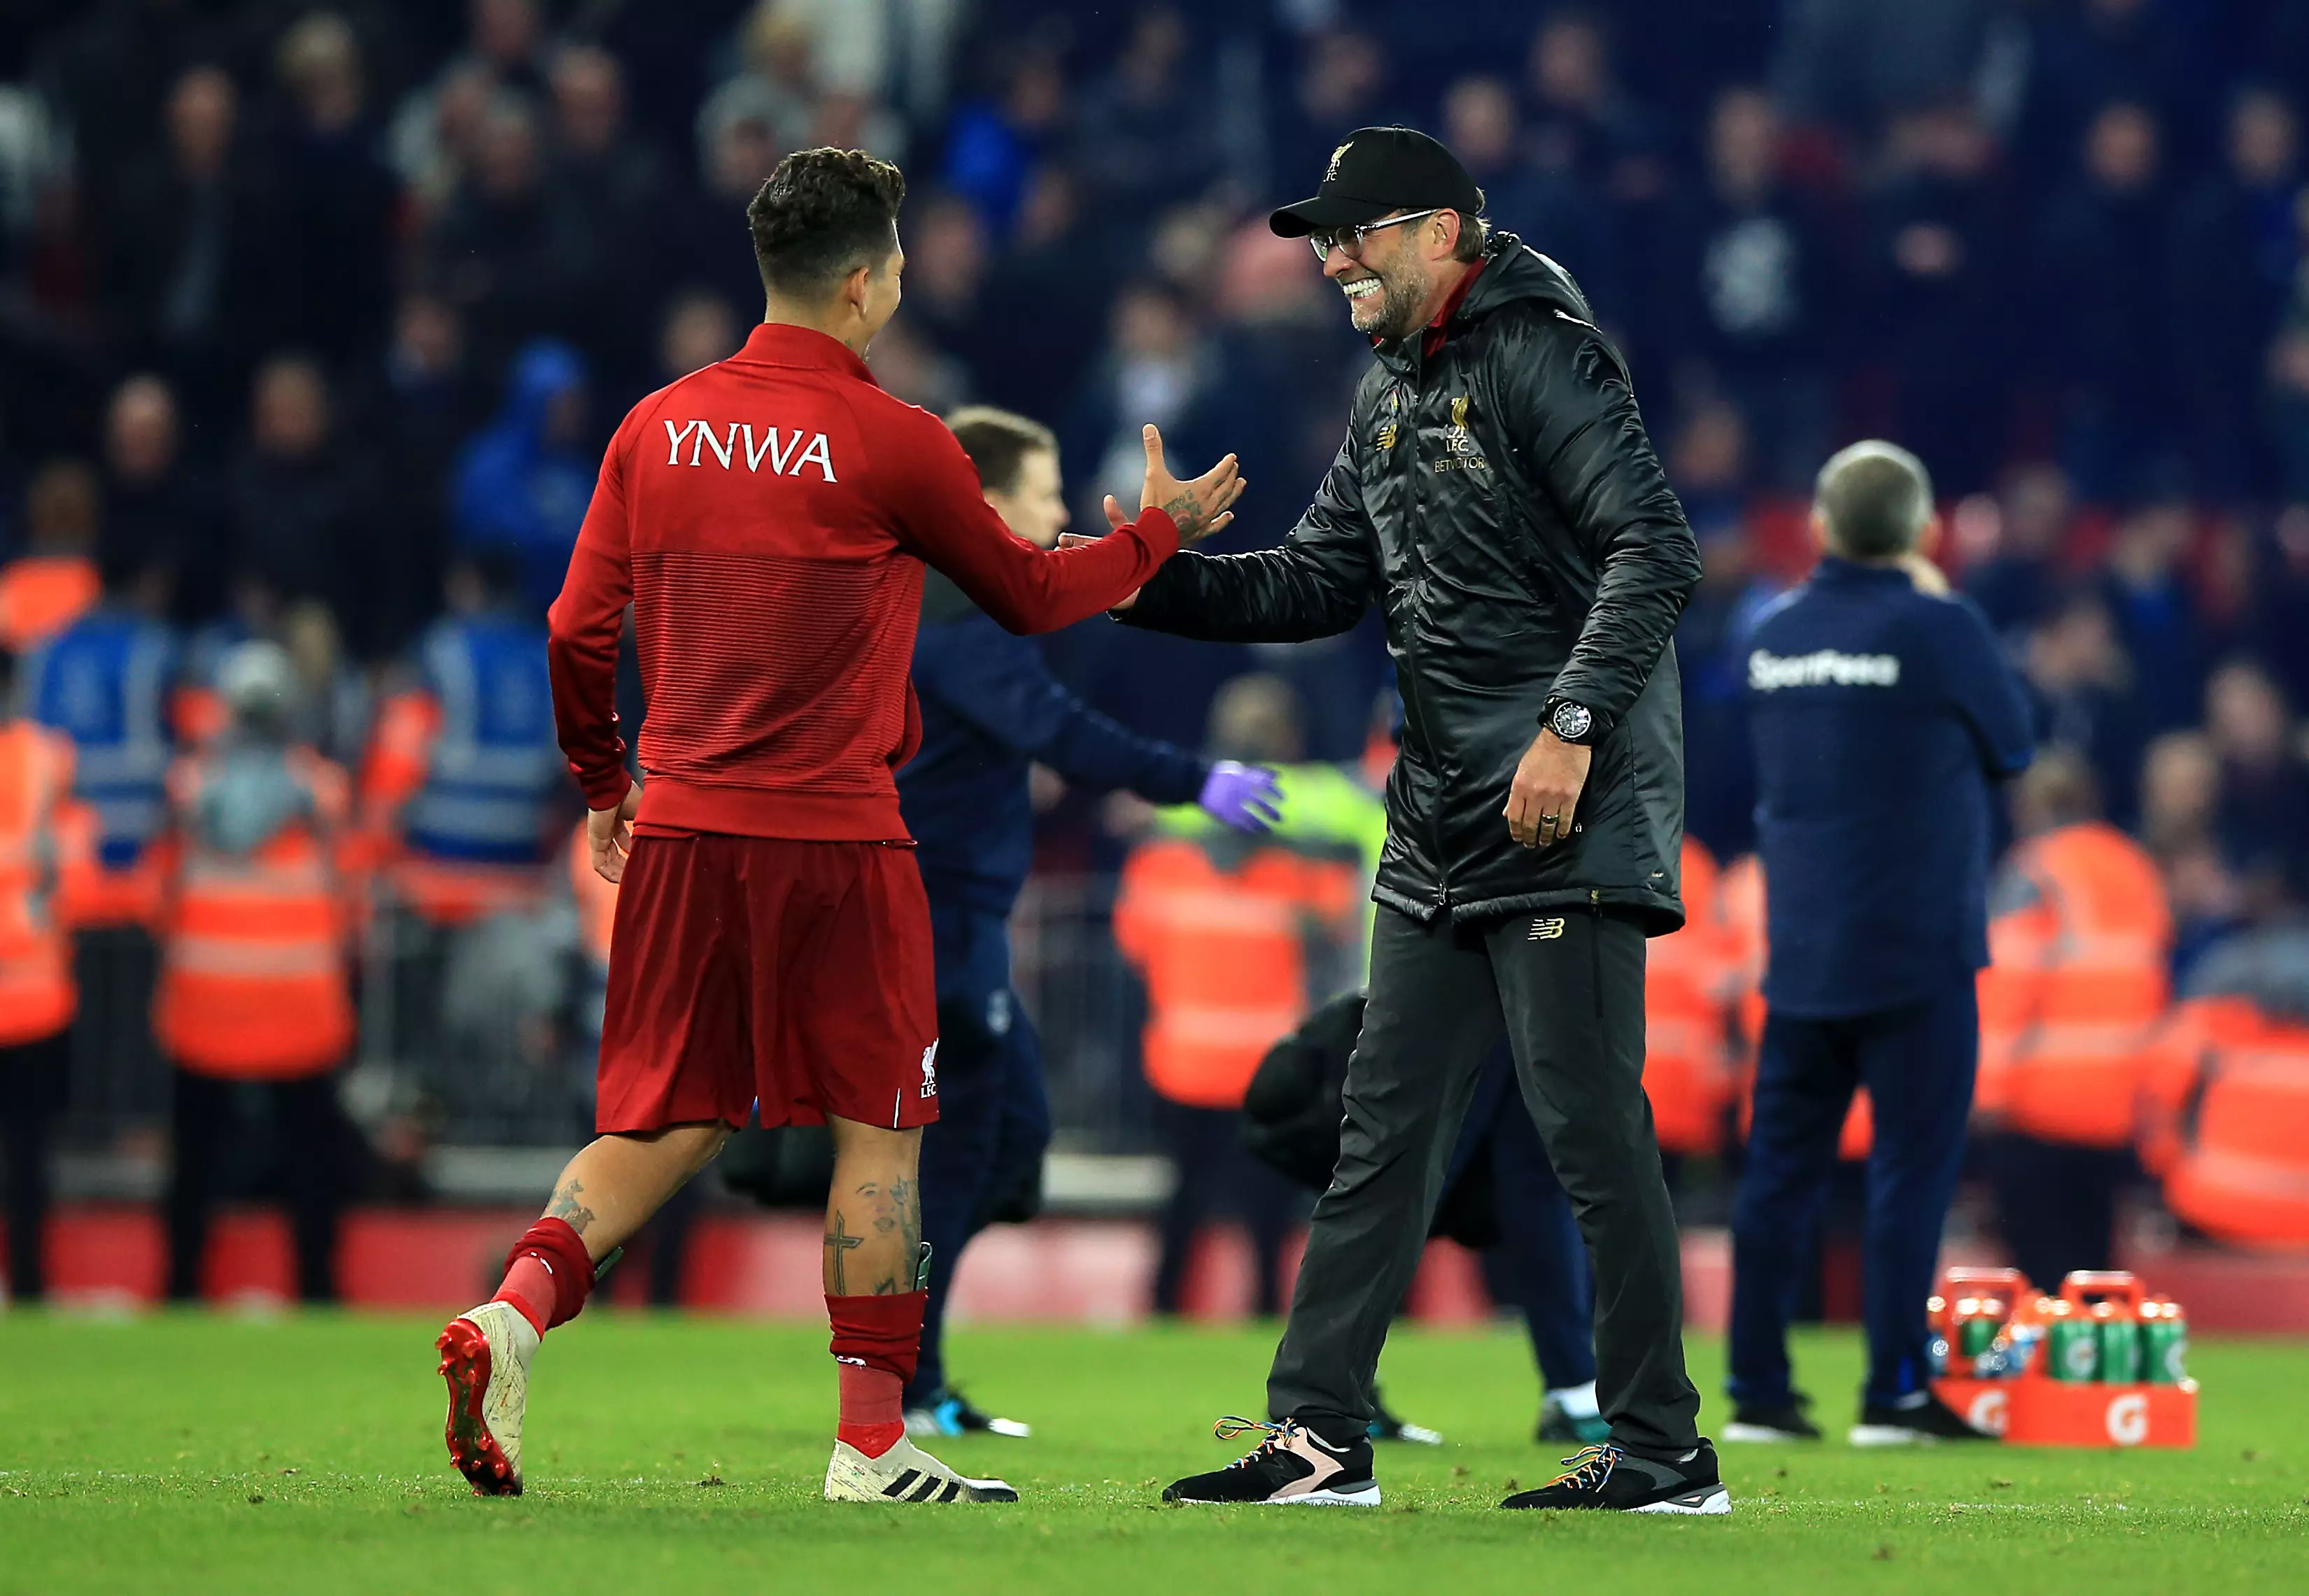 Jurgen Klopp explained the importance of having strikers who defend from the front like Roberto Firmino